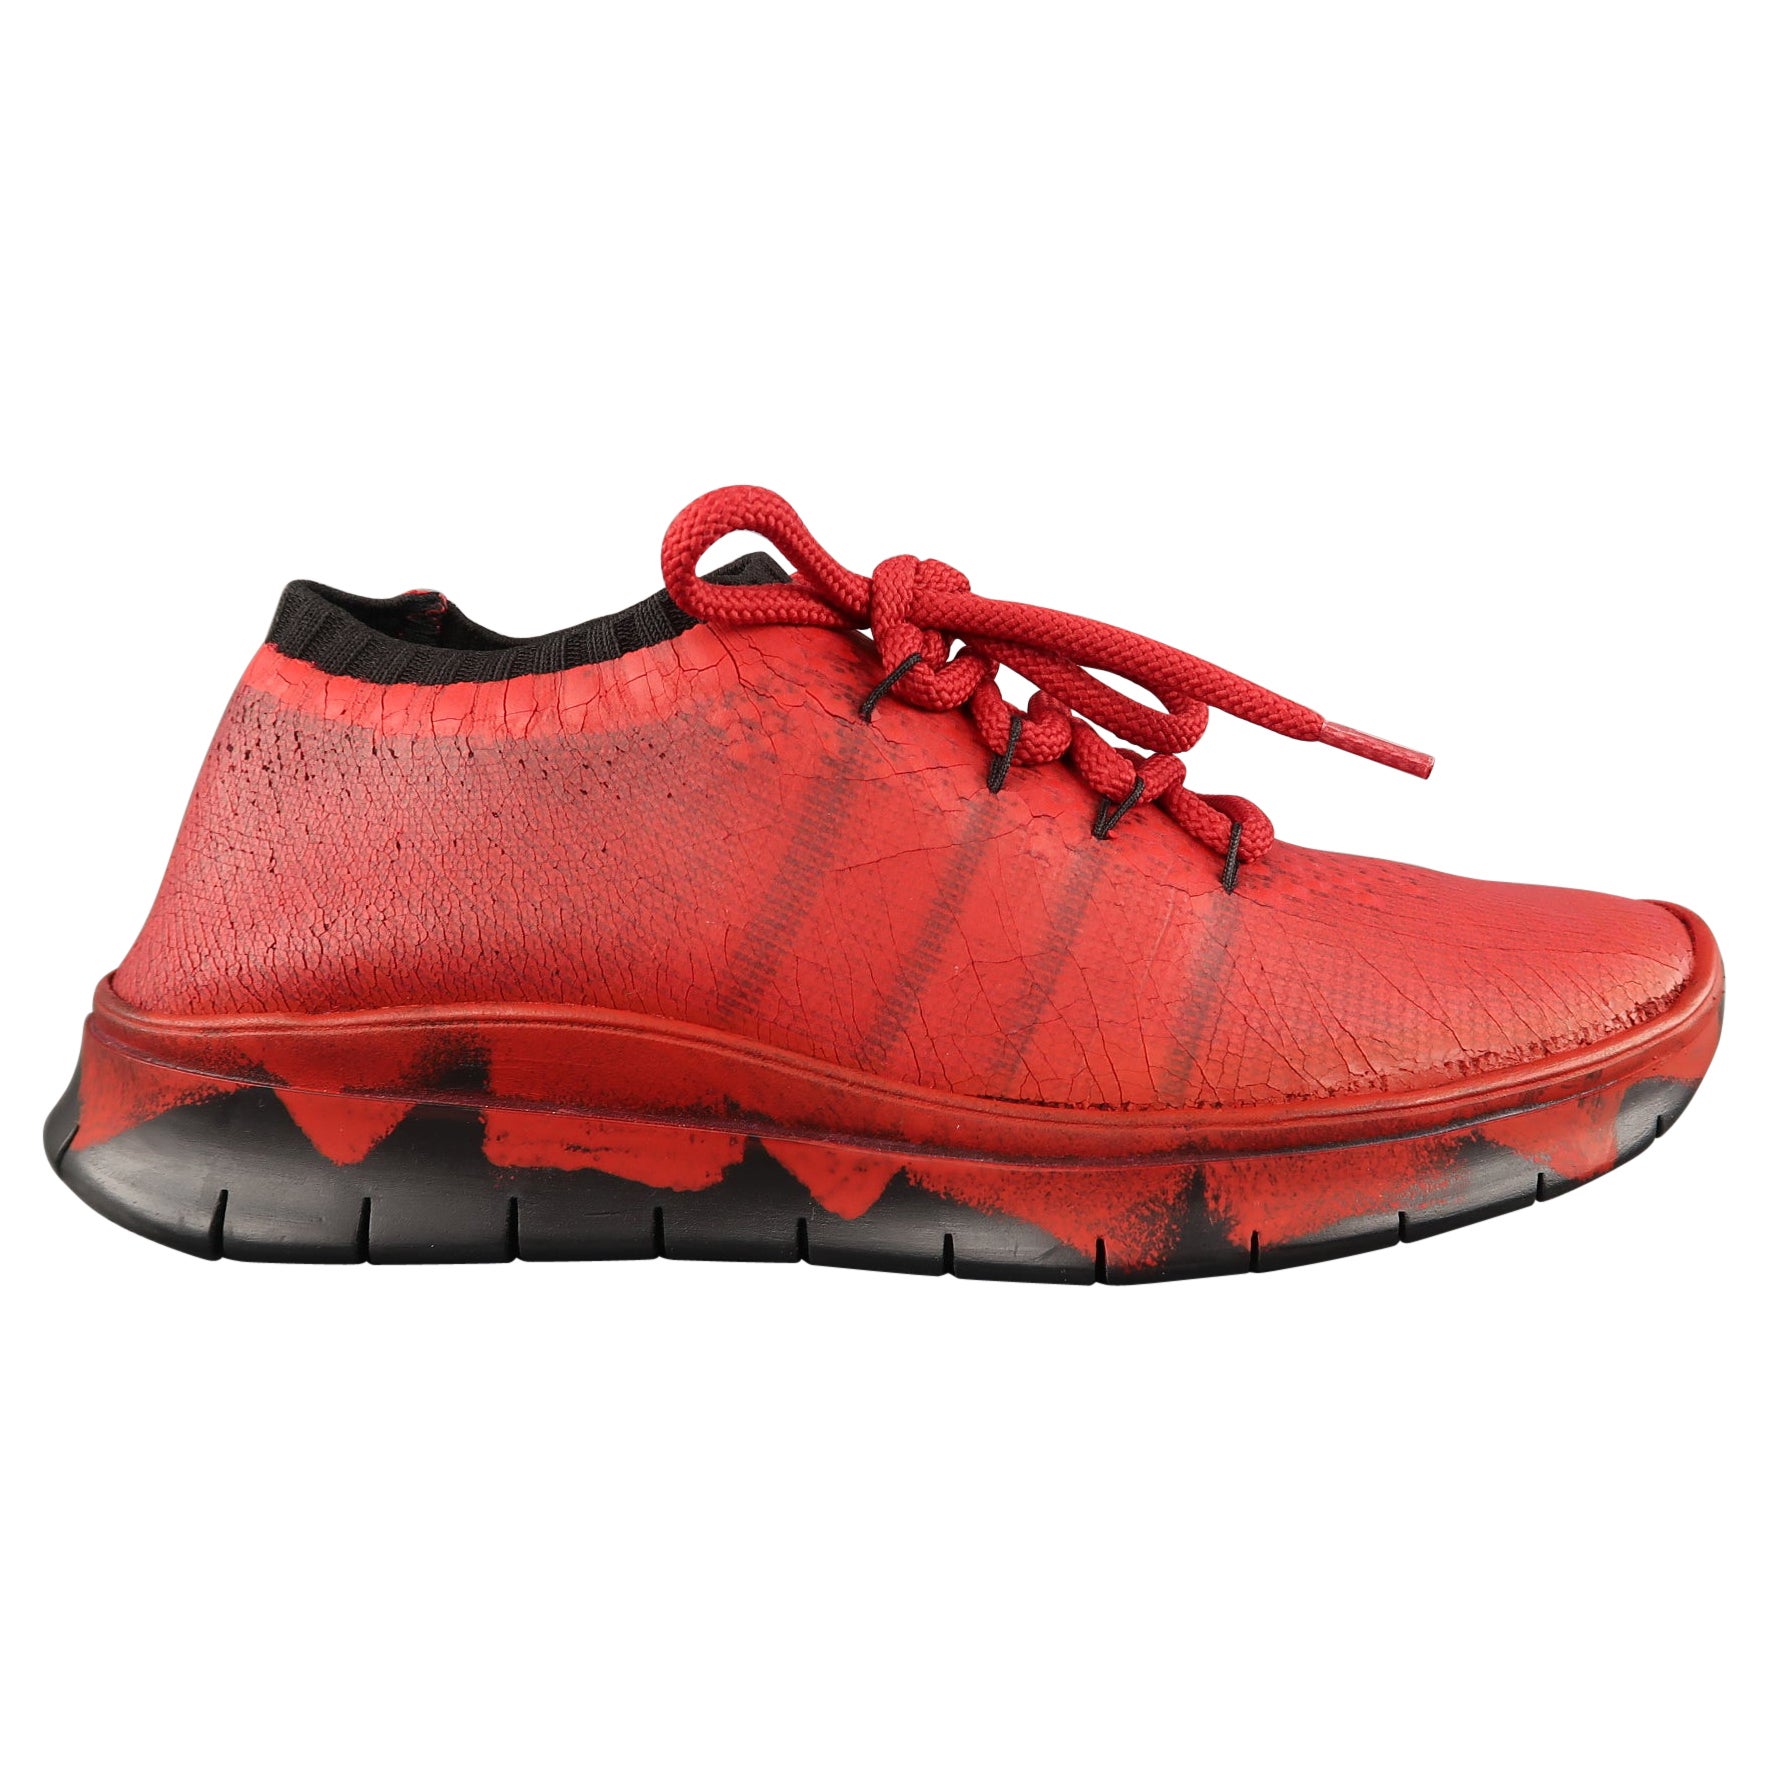 MAISON MARGIELA Size 6 Red Painted Knit Lace Up Sneakers